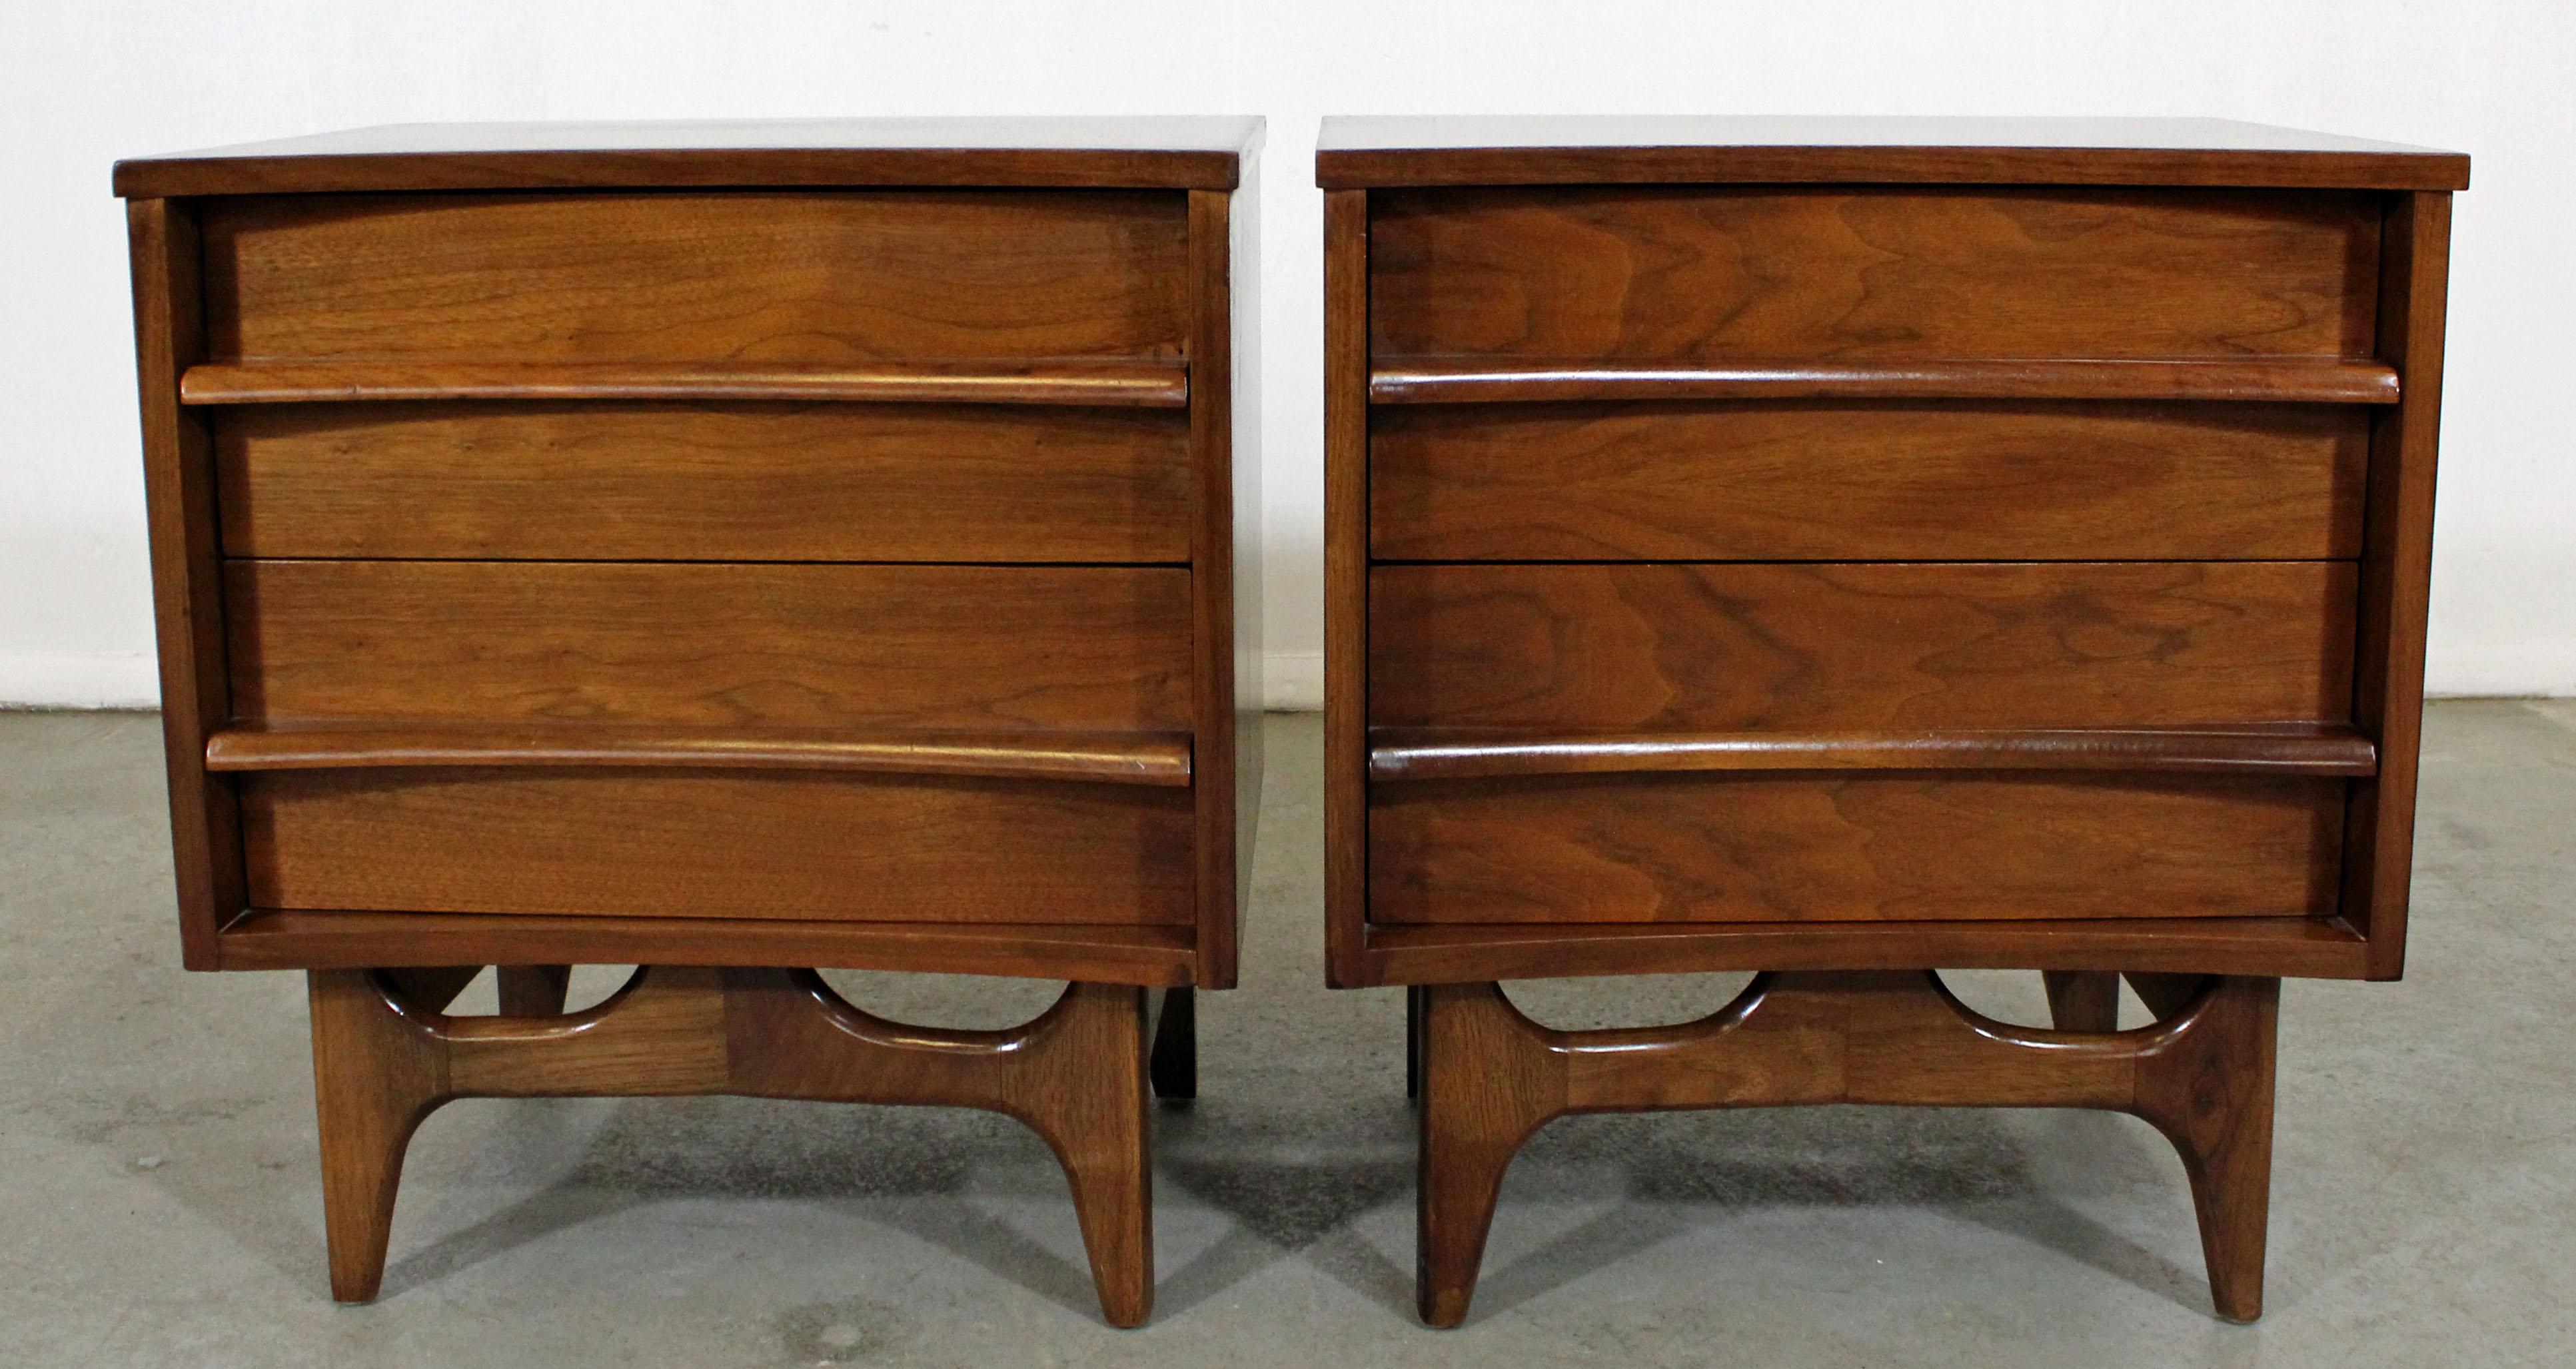 Offered is an excellent example of American Mid-Century Modern design. Includes a pair of walnut nightstands with two dovetailed drawers (each) and sculpted pulls. They have been refinished and are in good condition, showing some surface wear. They